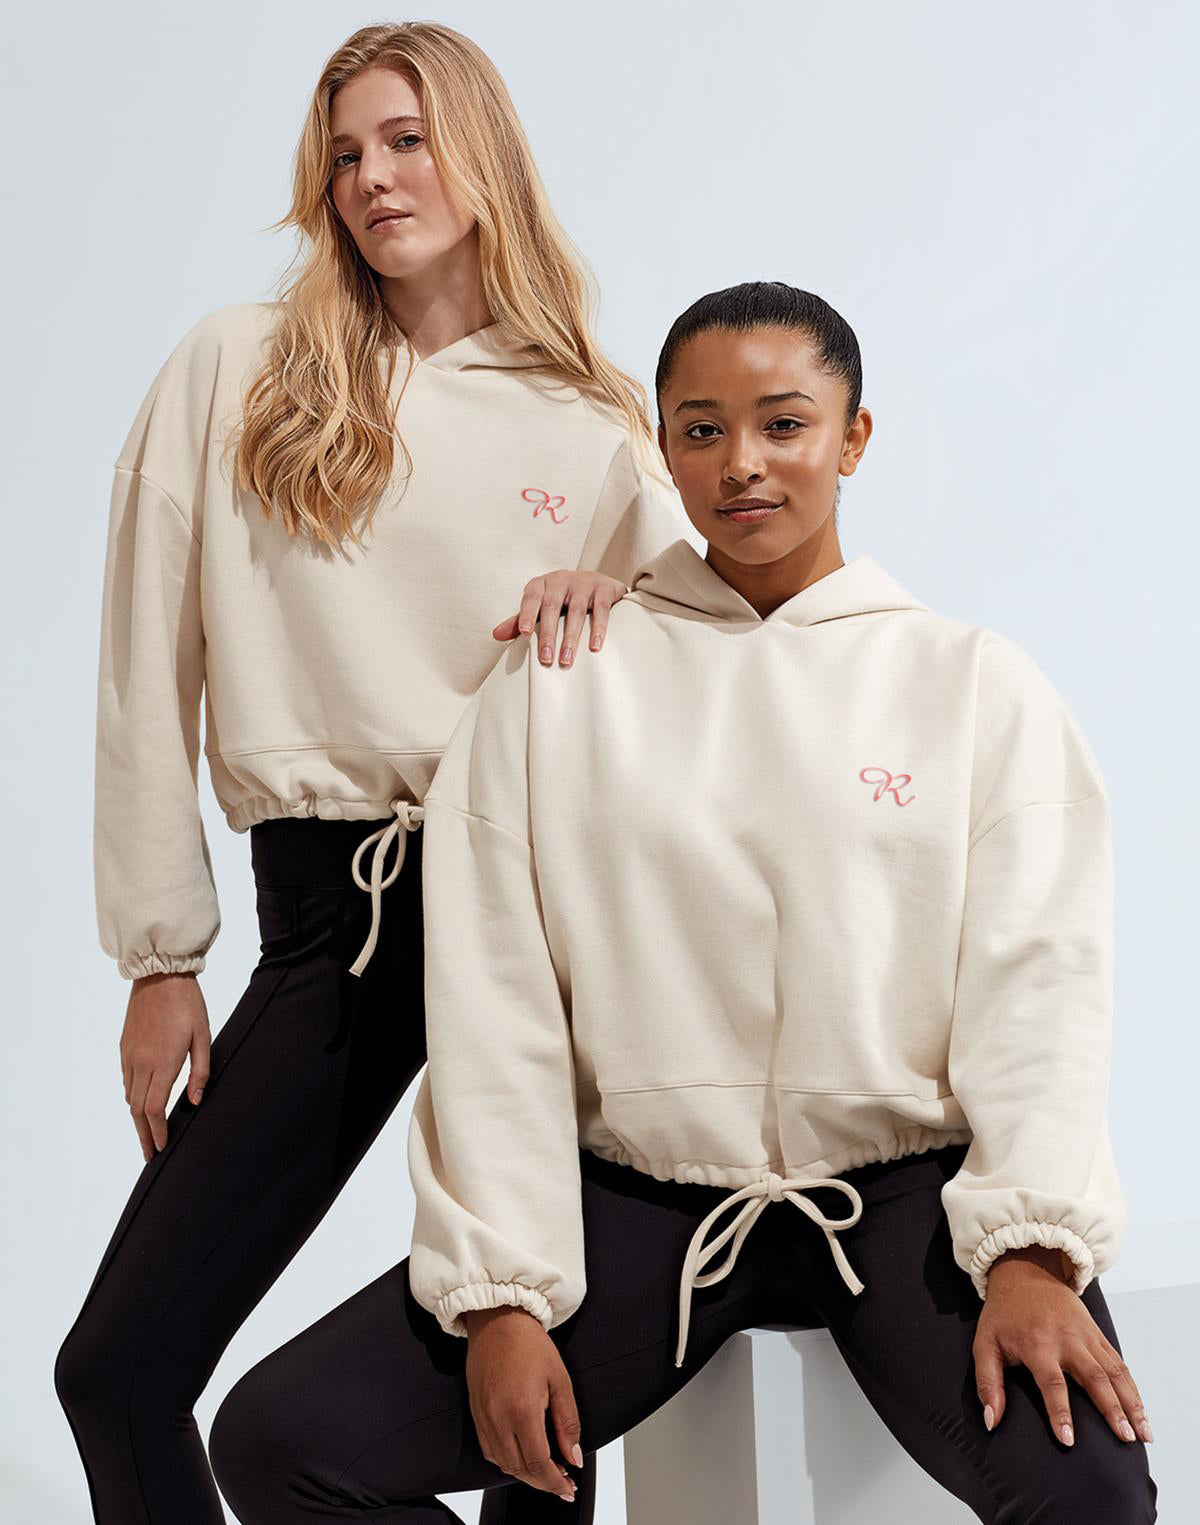 Two women confidently sporting Rival's oversized gym hoodies, exuding comfort and style. The hoodies feature Rival's signature logo prominently displayed, adding a touch of brand recognition to their athleisure look. The loose-fitting design and breathable fabric ensure freedom of movement during workouts, while the trendy oversized silhouette offers a fashionable edge. These hoodies are the perfect blend of functionality and fashion for active lifestyles